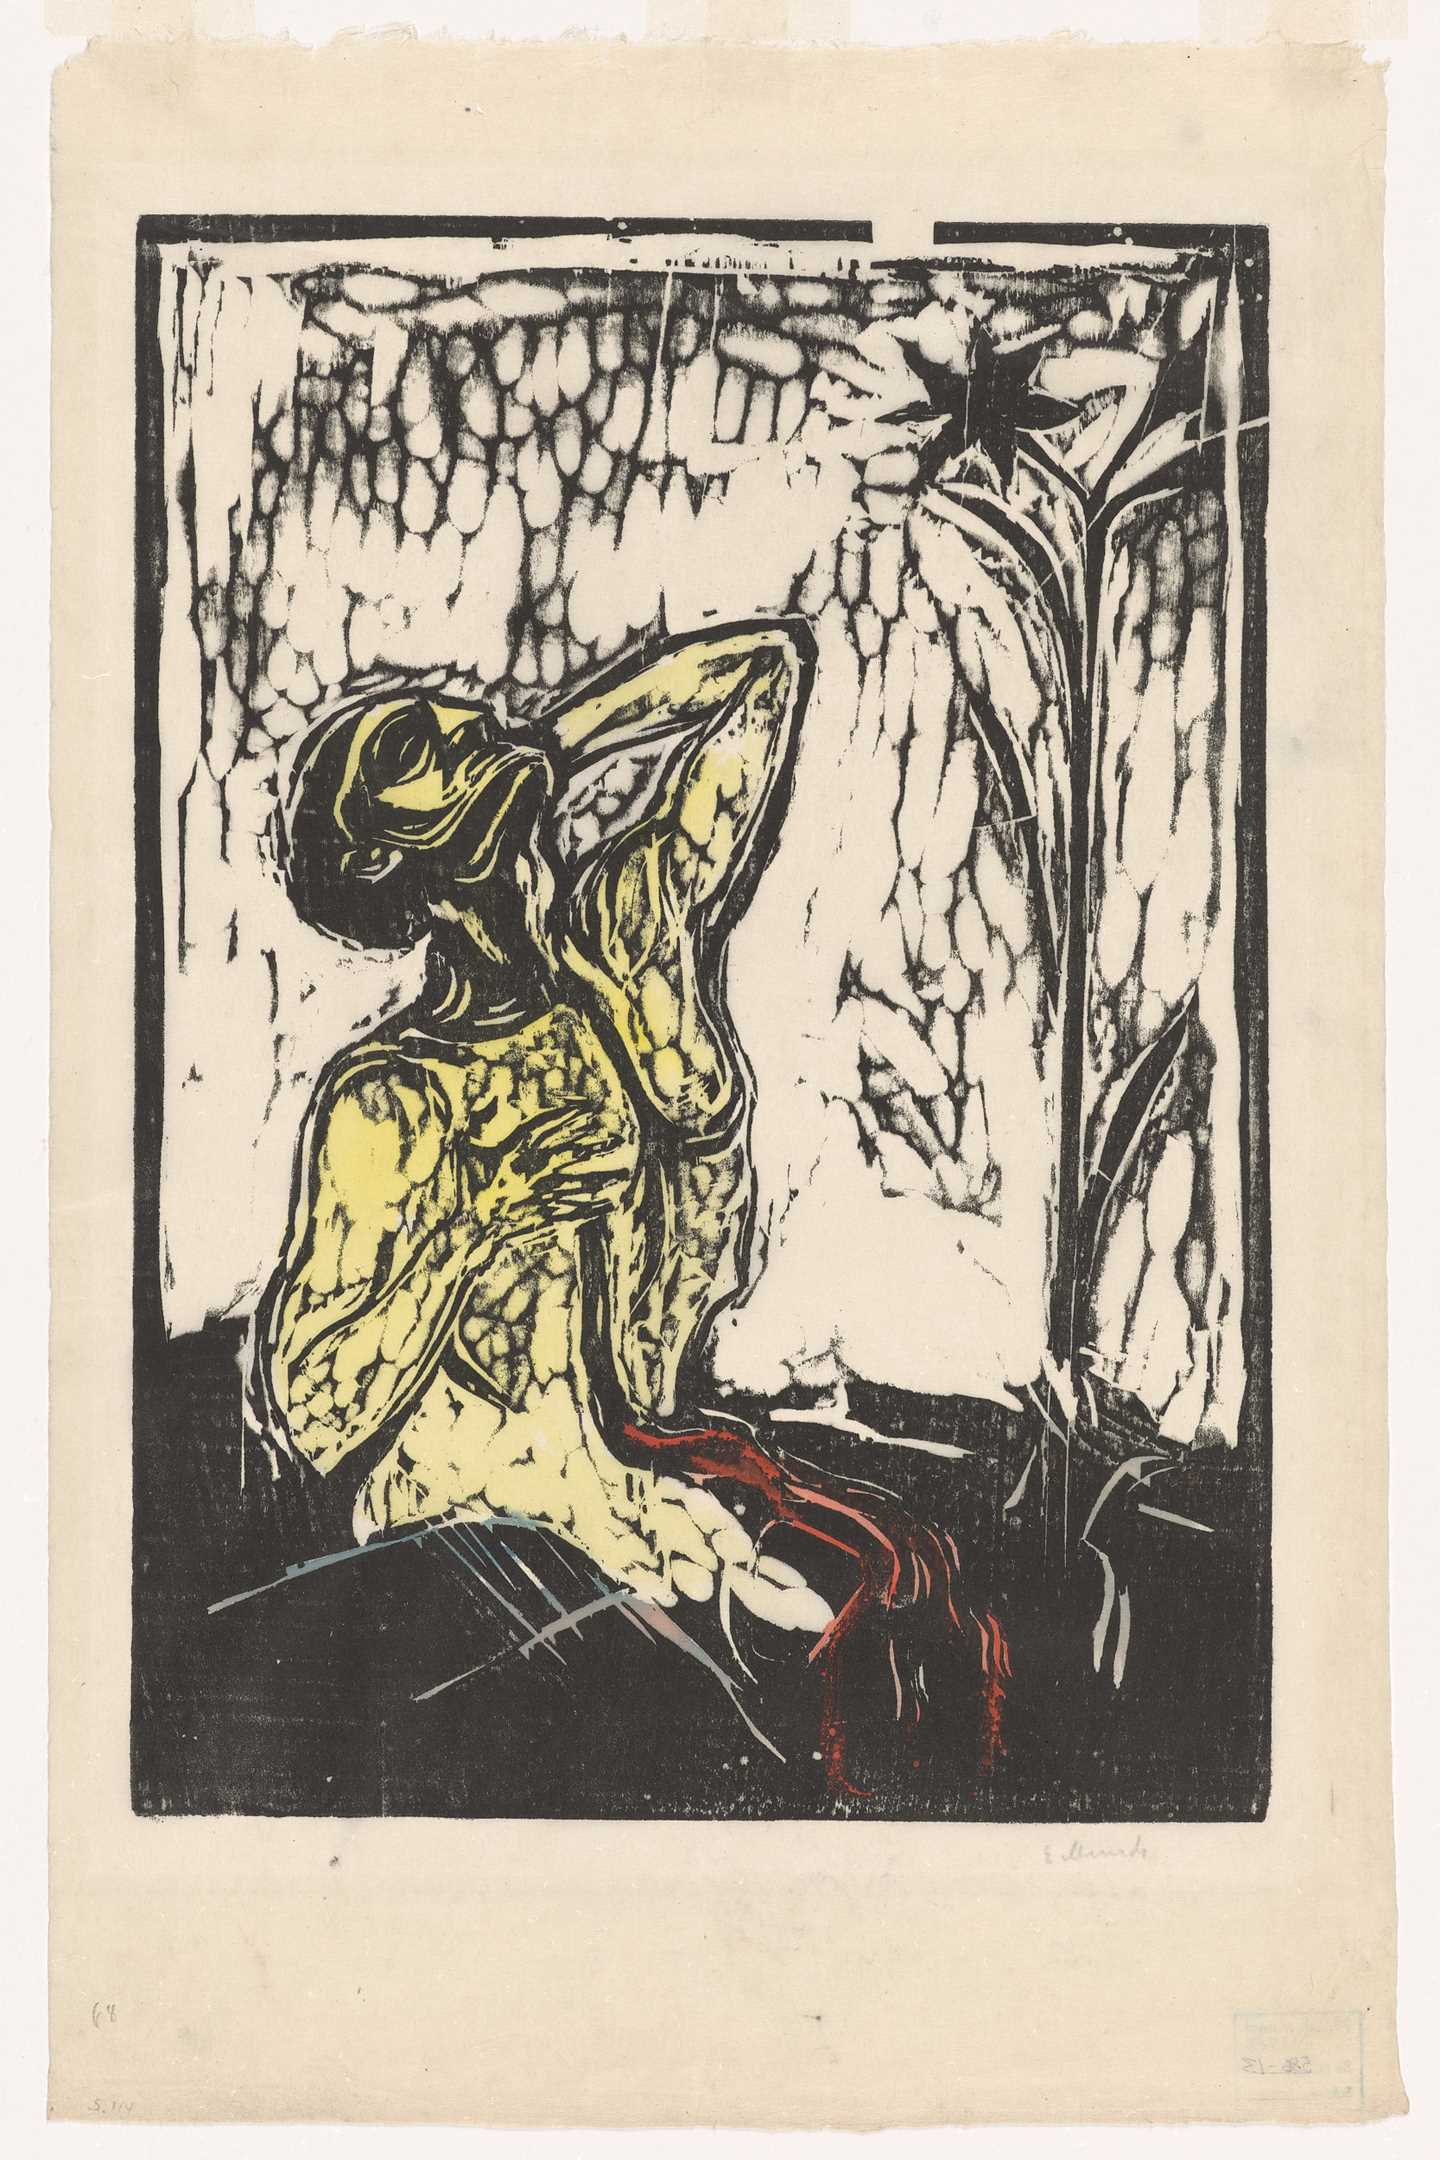 Edvard Munch: Blossom of Pain. Hand-colored woodcut, 1898. Photo © Munchmuseet